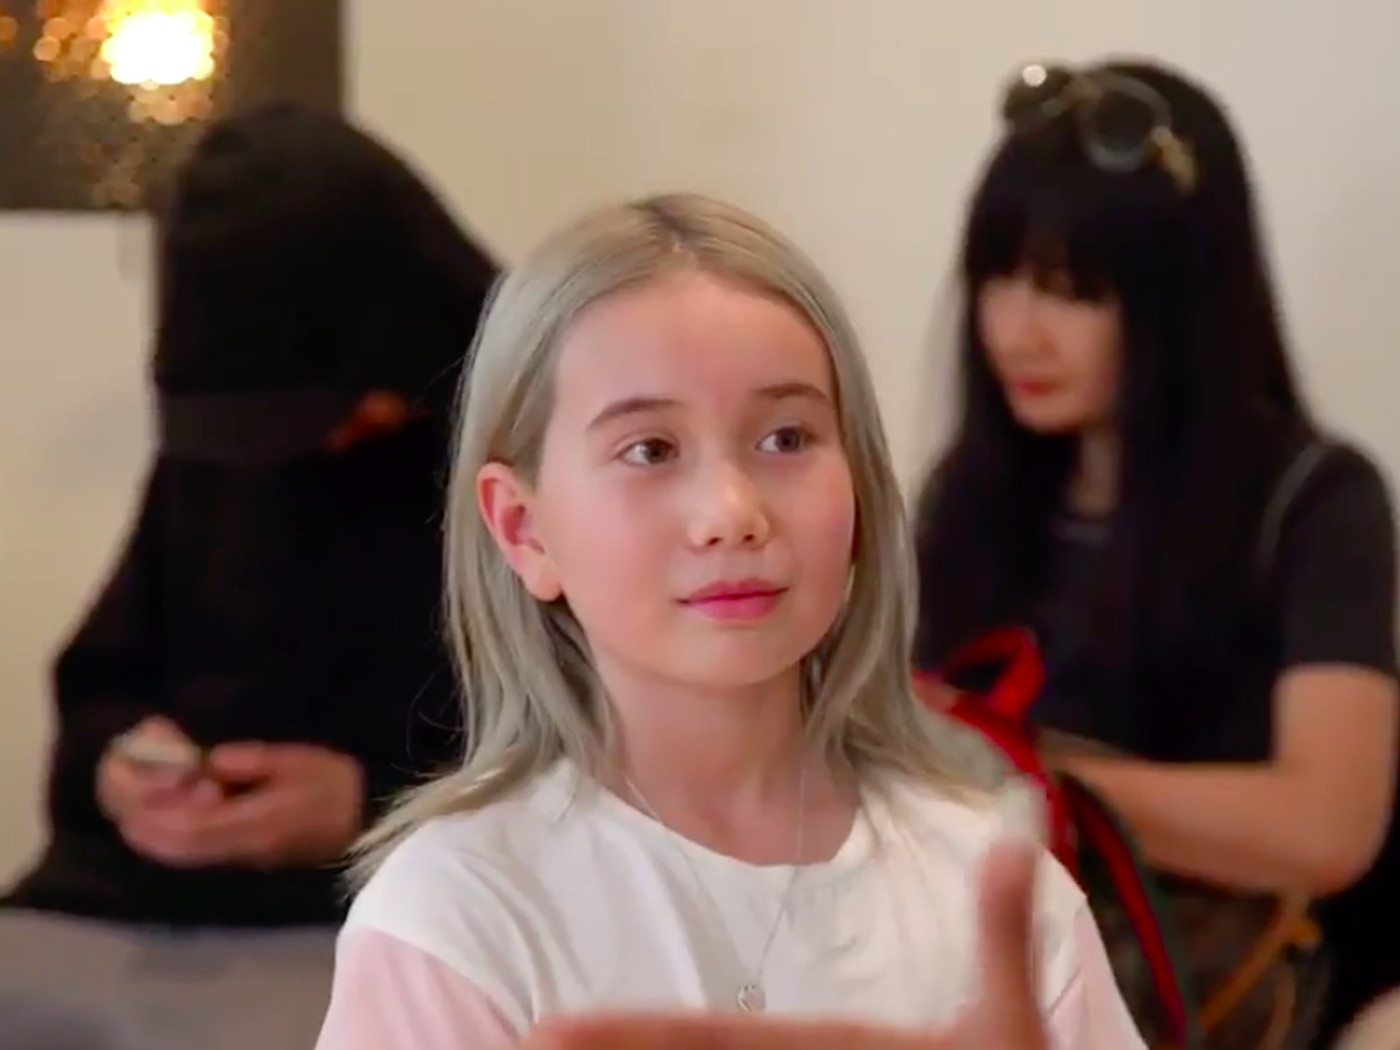 Lil Tay's posts about her father Christopher J's alleged abuse